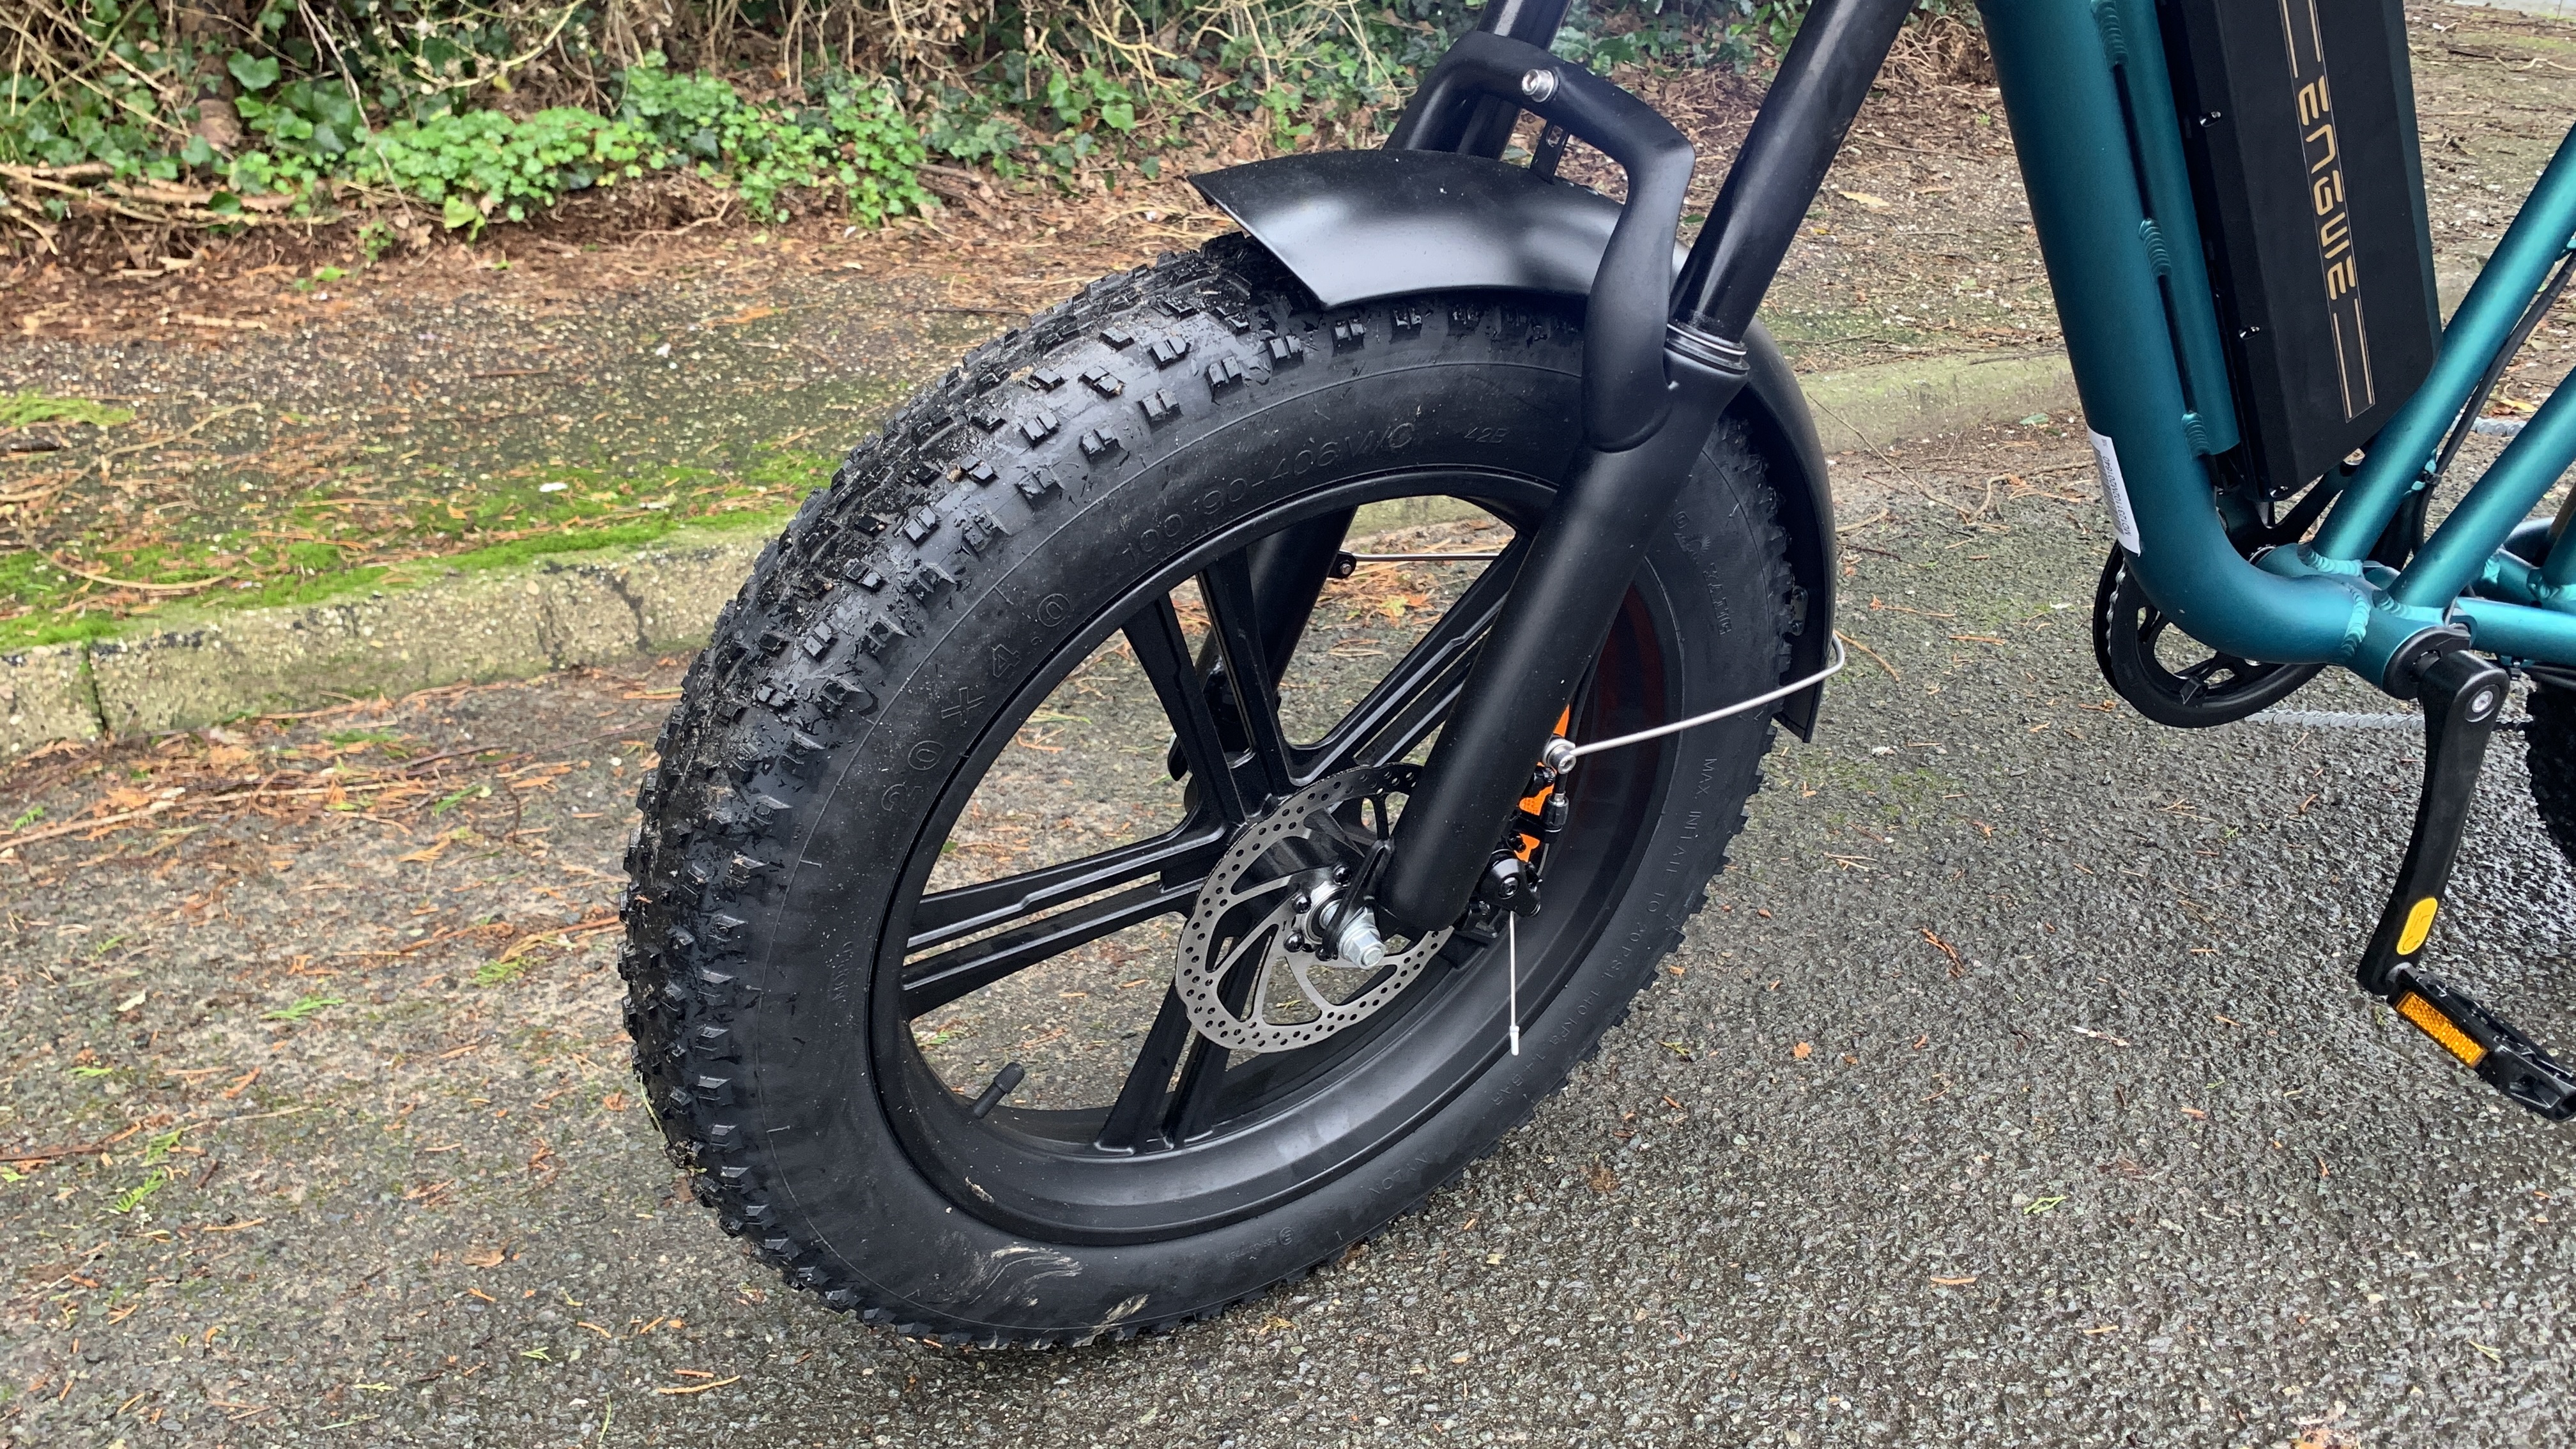 Engwe M20 E-Bike with substantial tyres